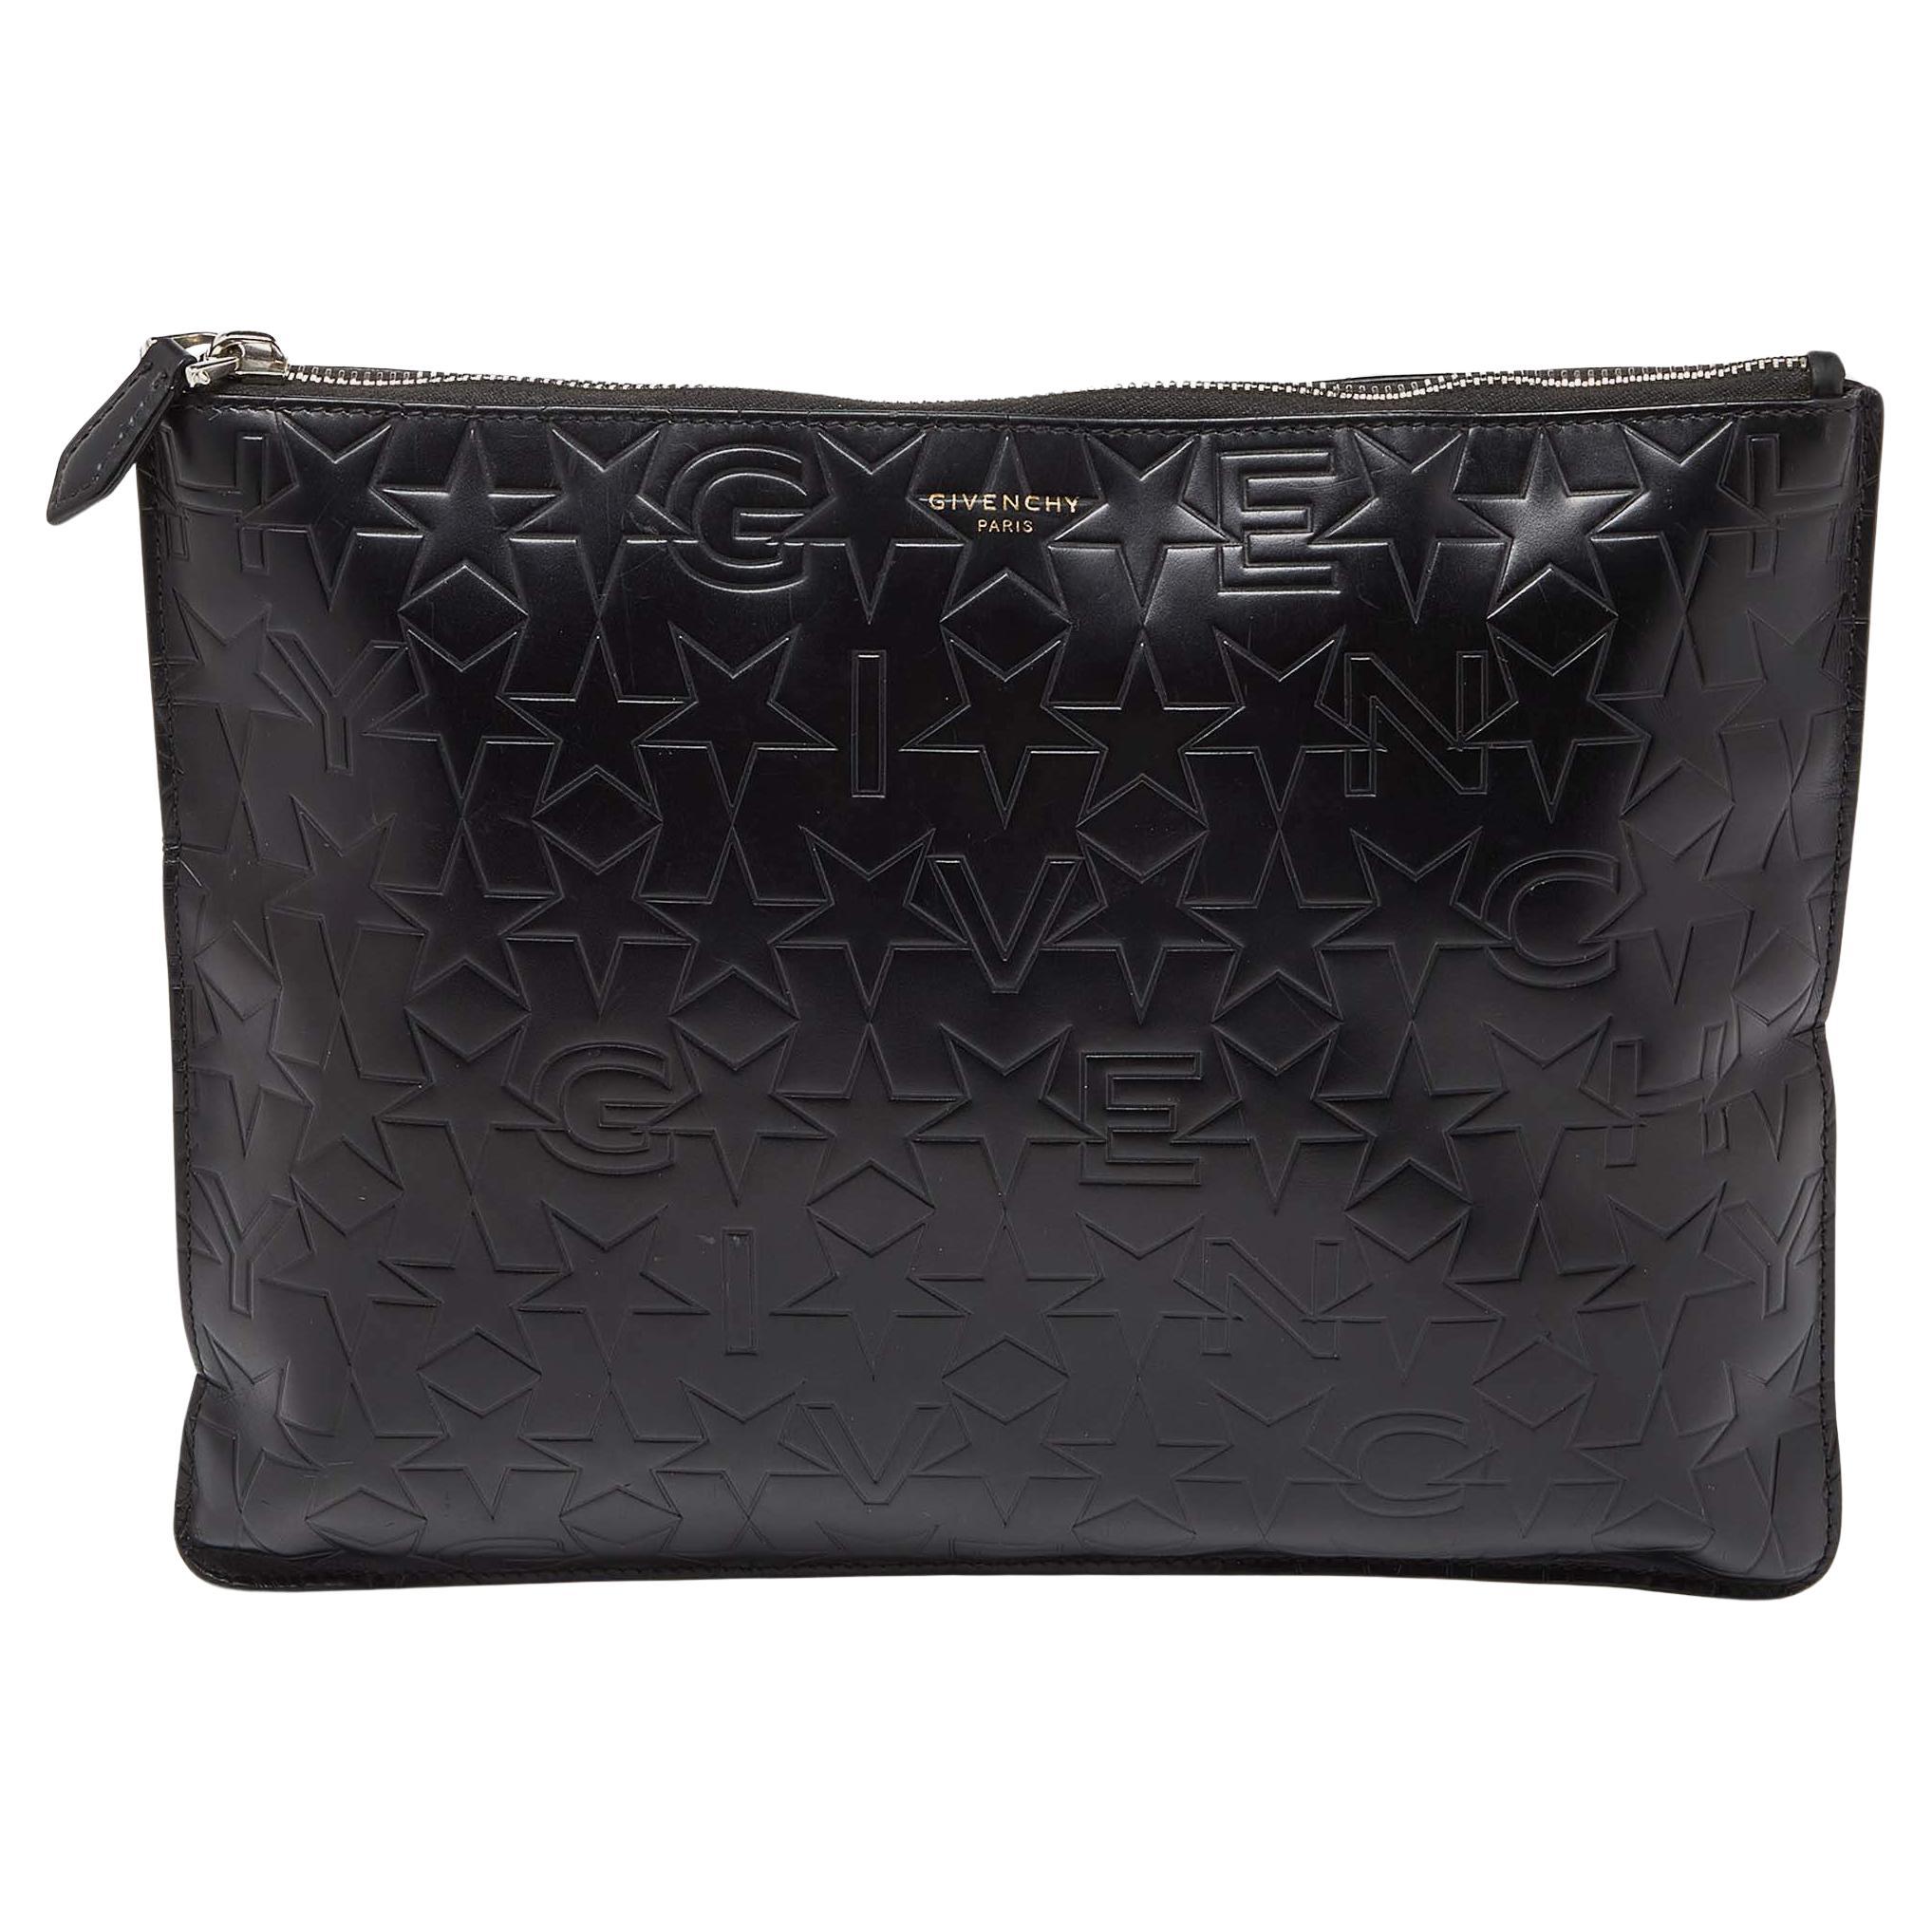 Givenchy Black Star Embossed Leather Zip Clutch For Sale